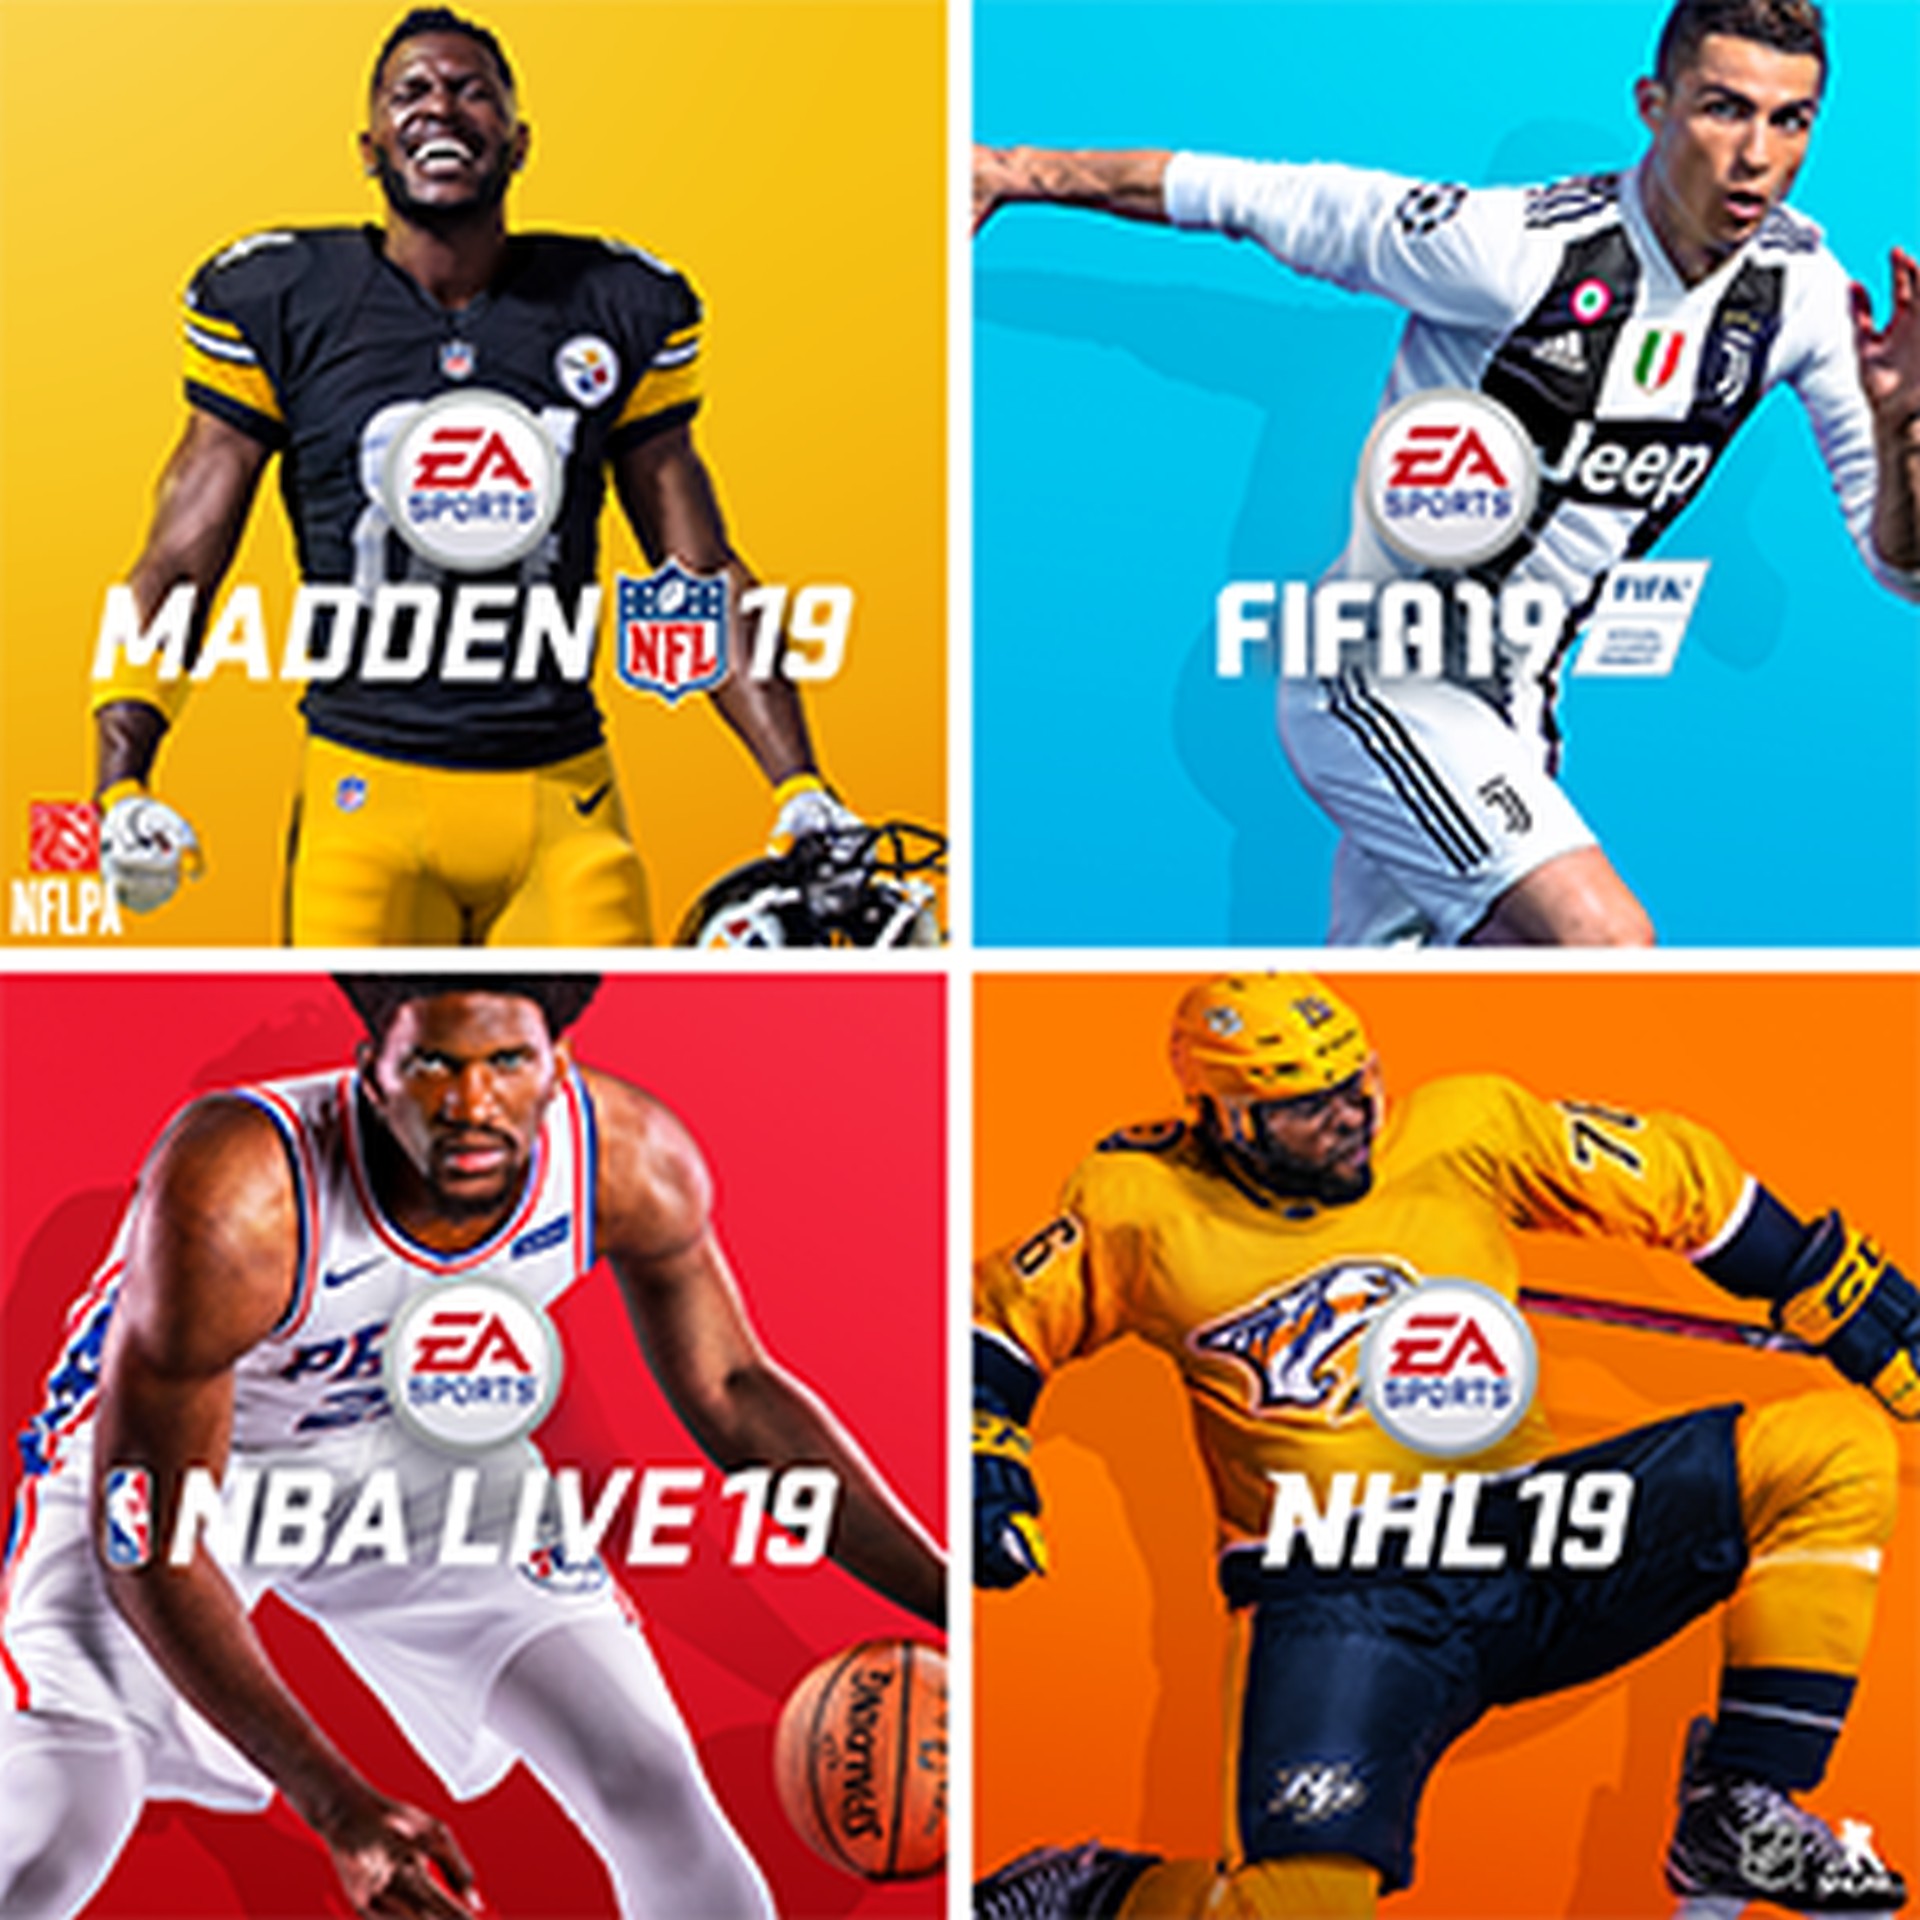 Get Four Great Games with the EA Sports Bundle